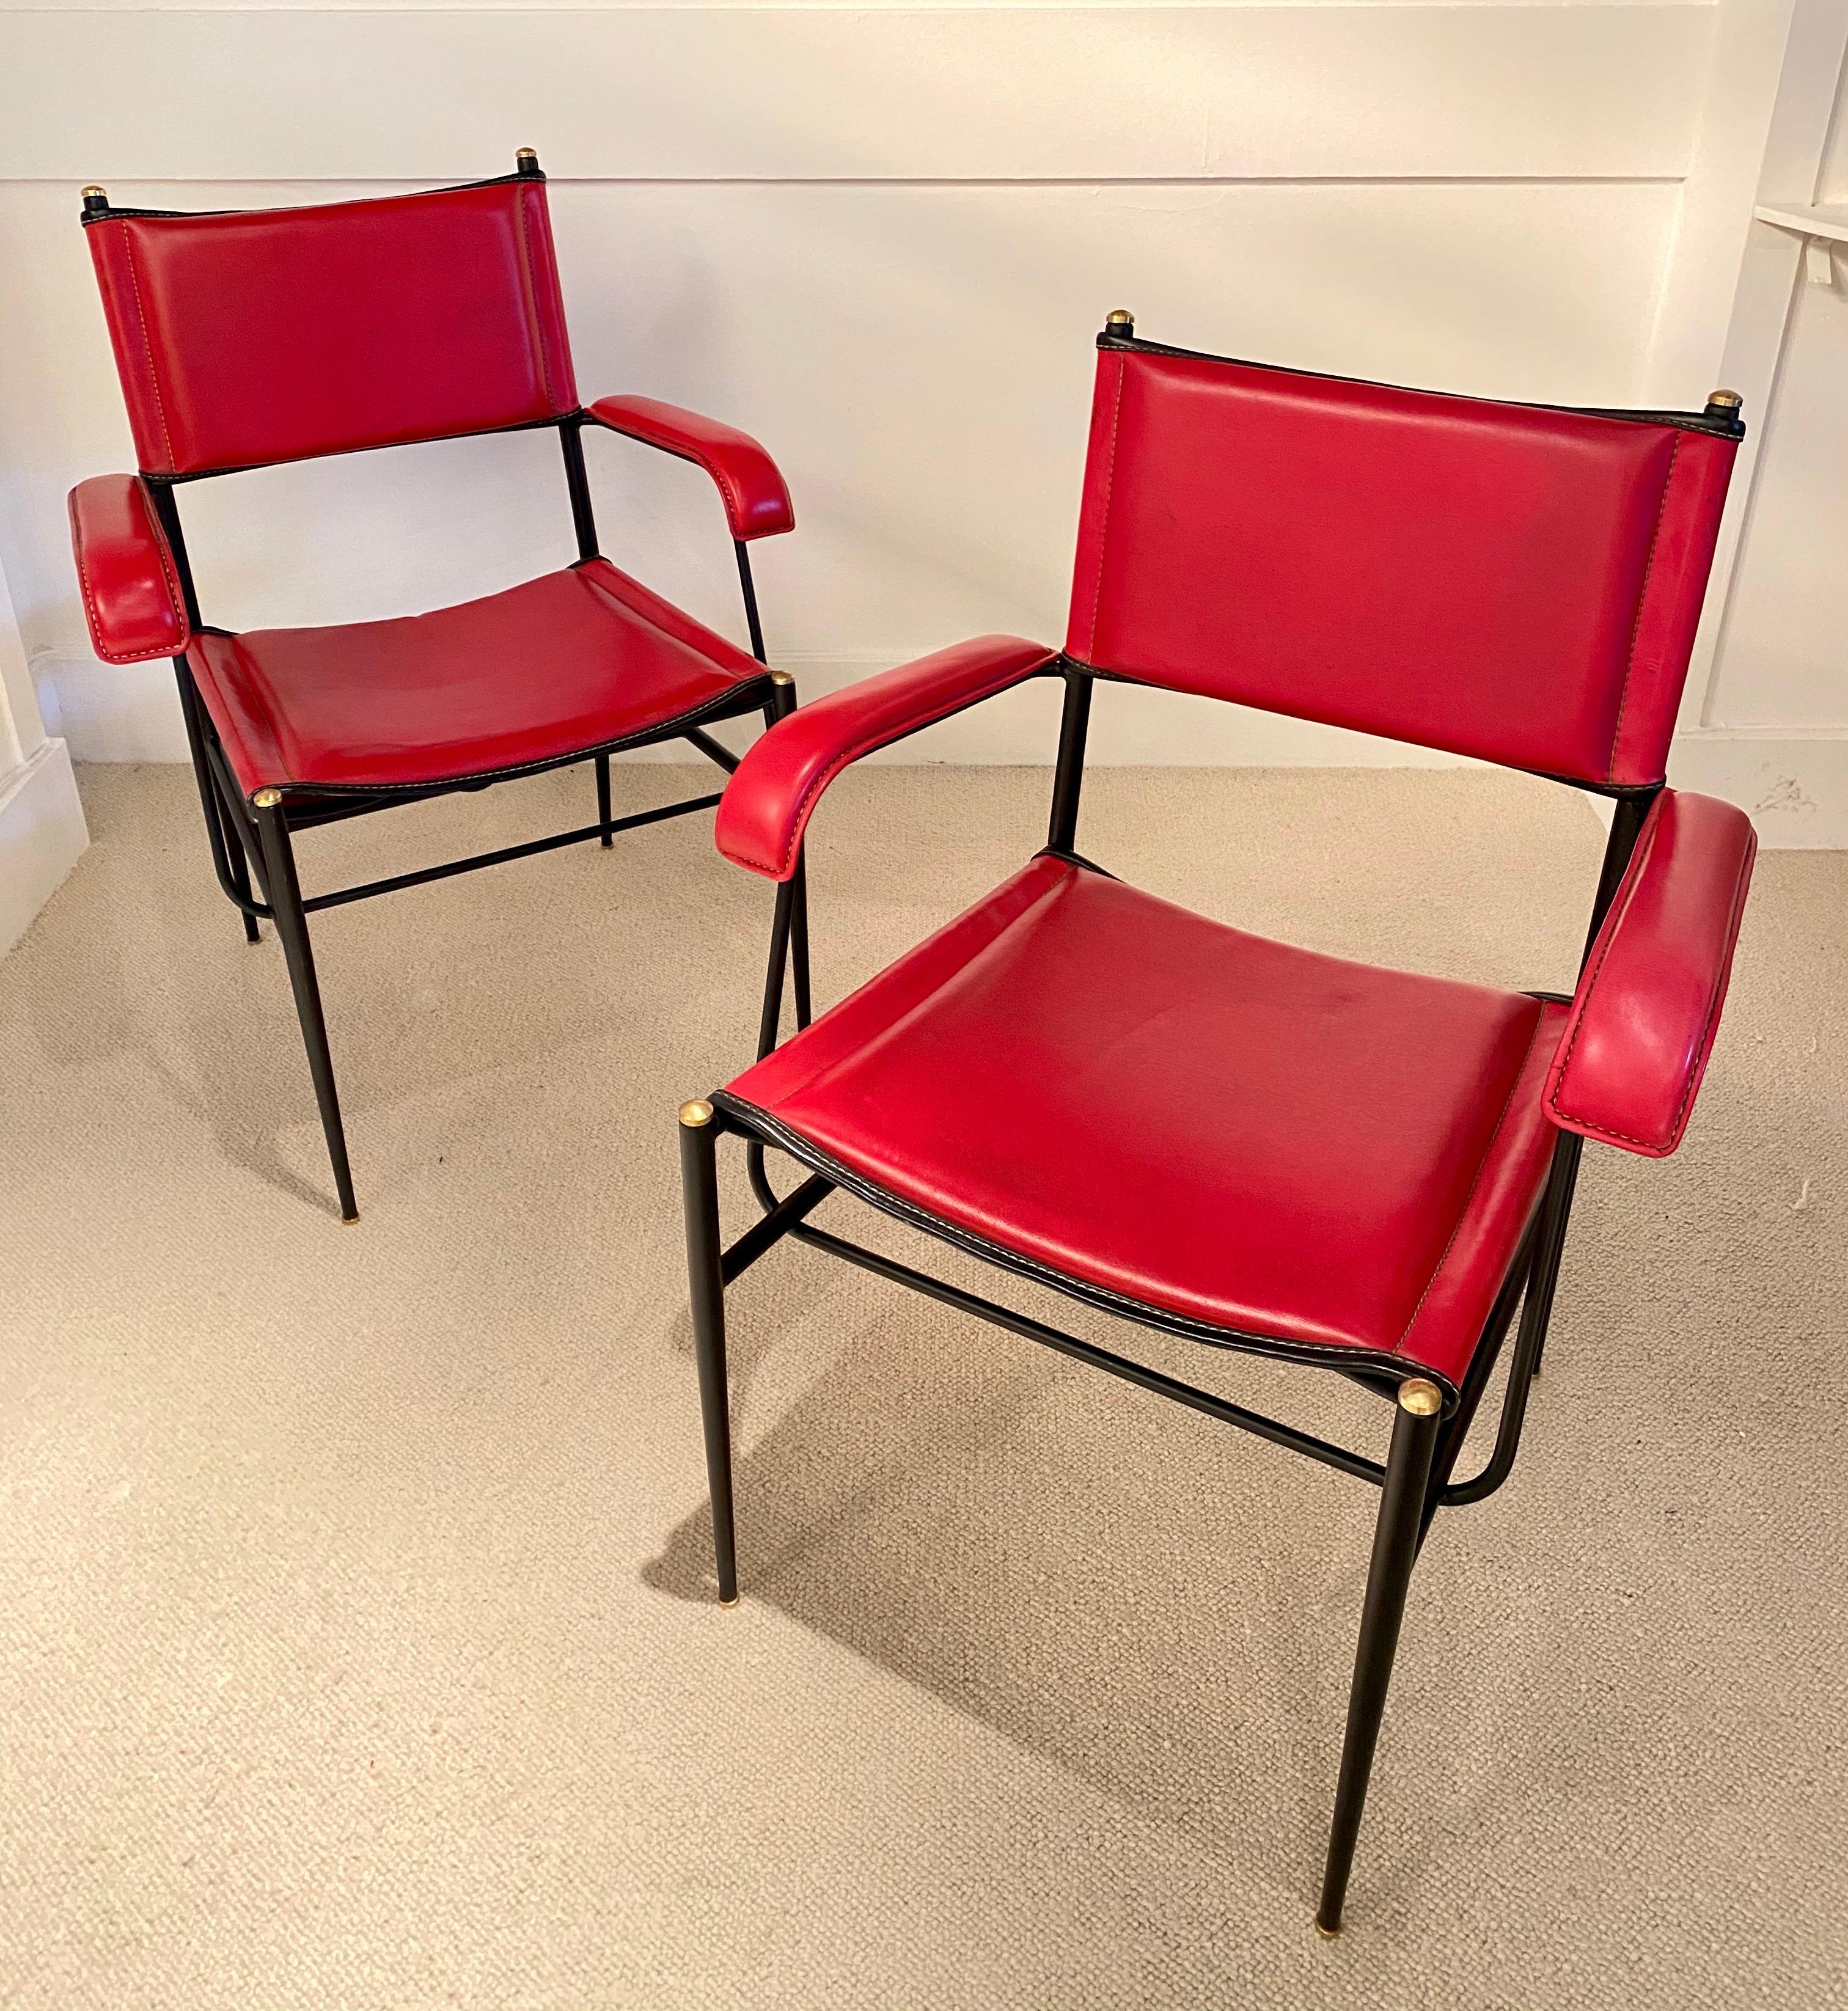 Pair of armchairs with black iron structure and brass details
Red Stiched original leather and black stripes
Jacques Adnet, circa 1950
Great condition.